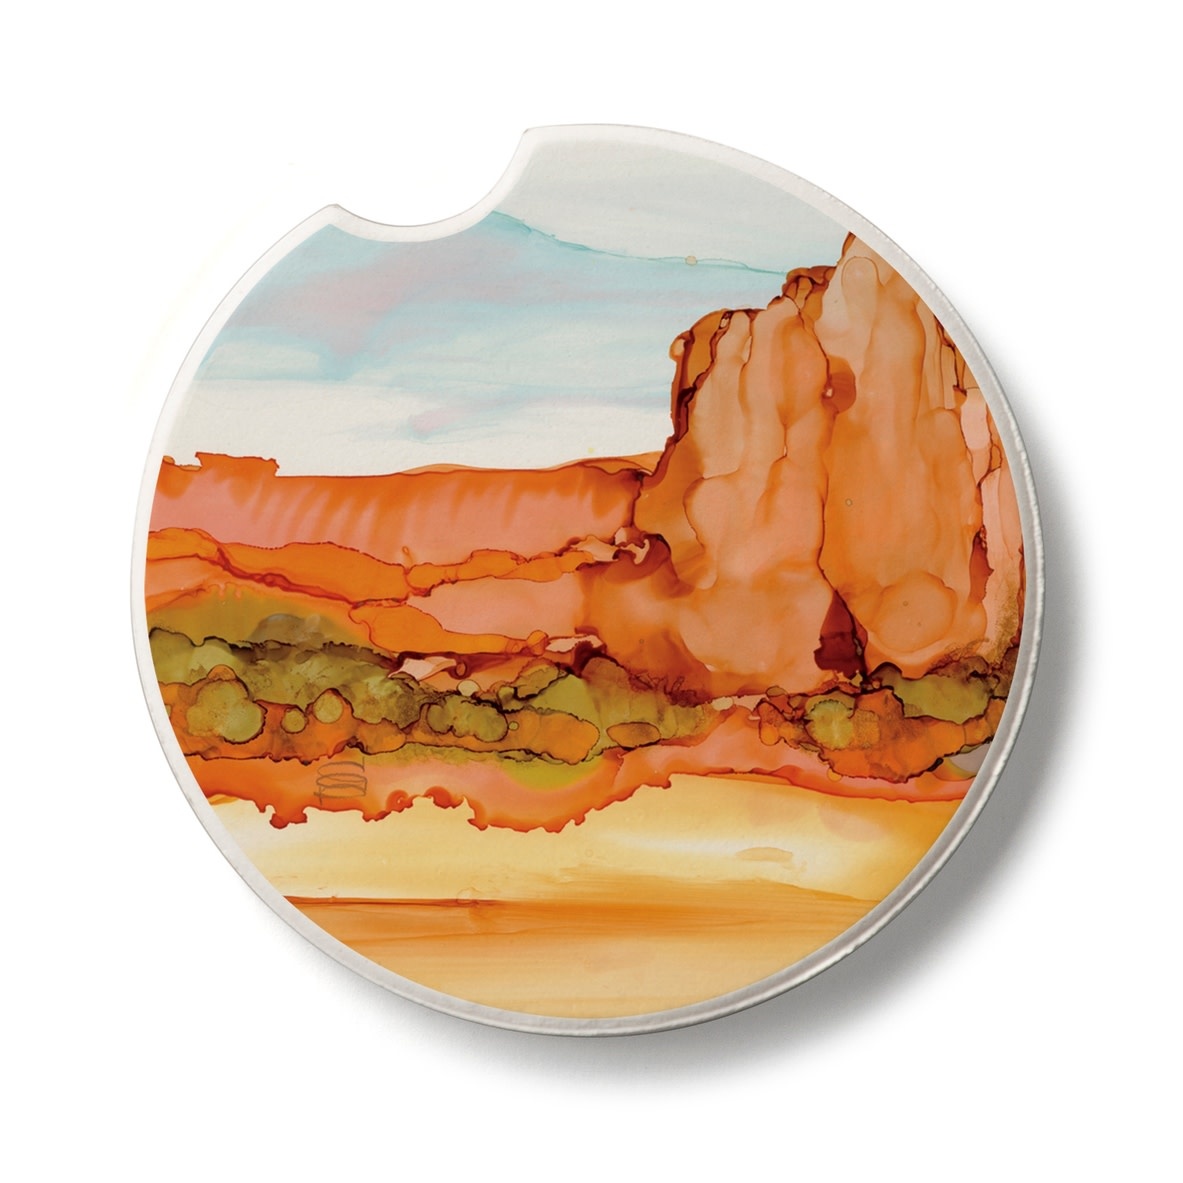 CounterArt and Highland Home Thirstystone "Desertscape" Absorbent Stone Car Coaster